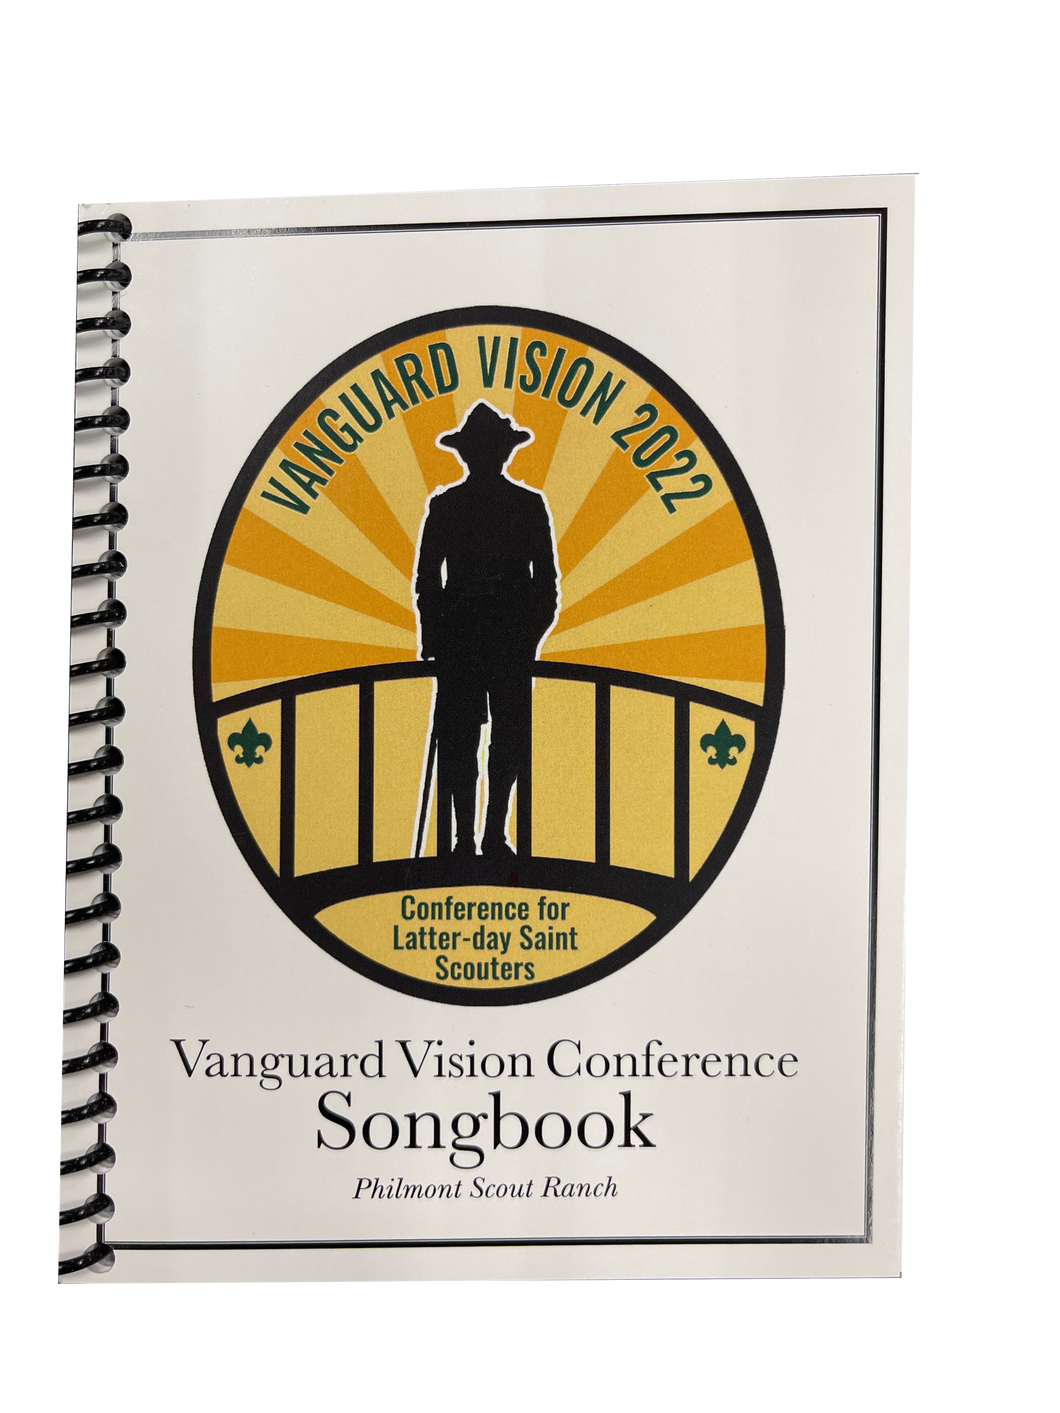 Vanguard Vision Conference Songbook